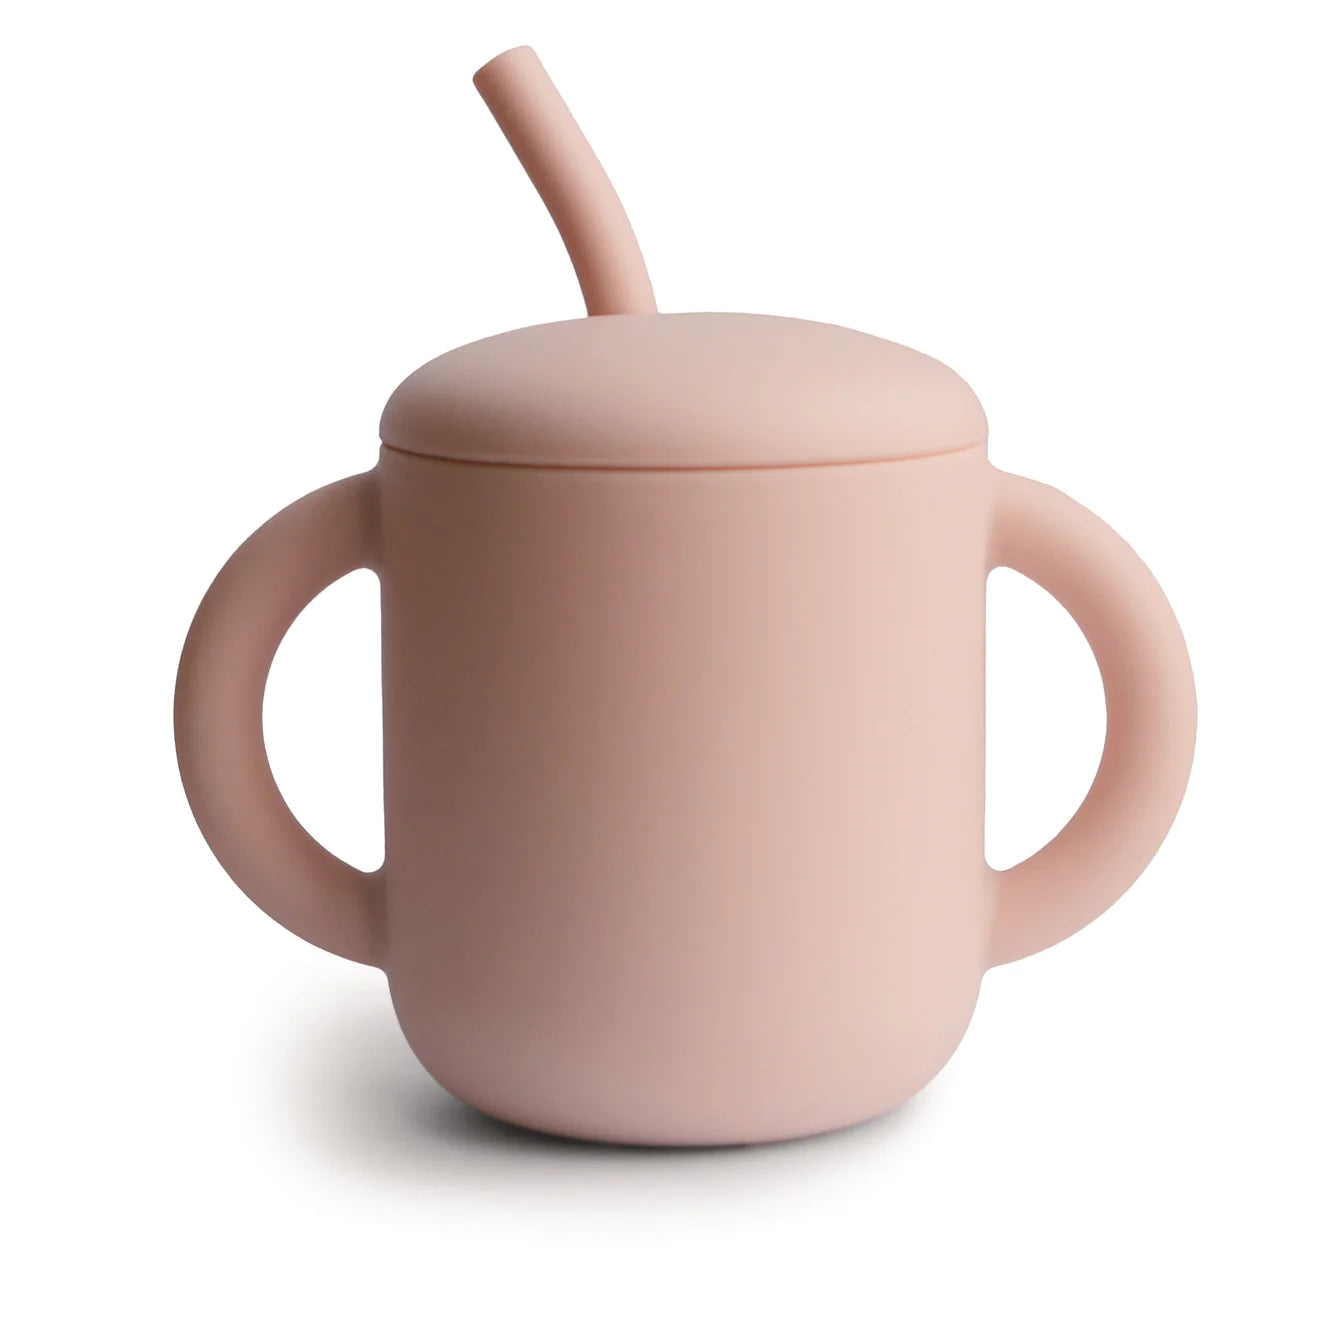 Tasse en silicone avec paille et couvercle - Silicone Training Cup + Straw - Mushie